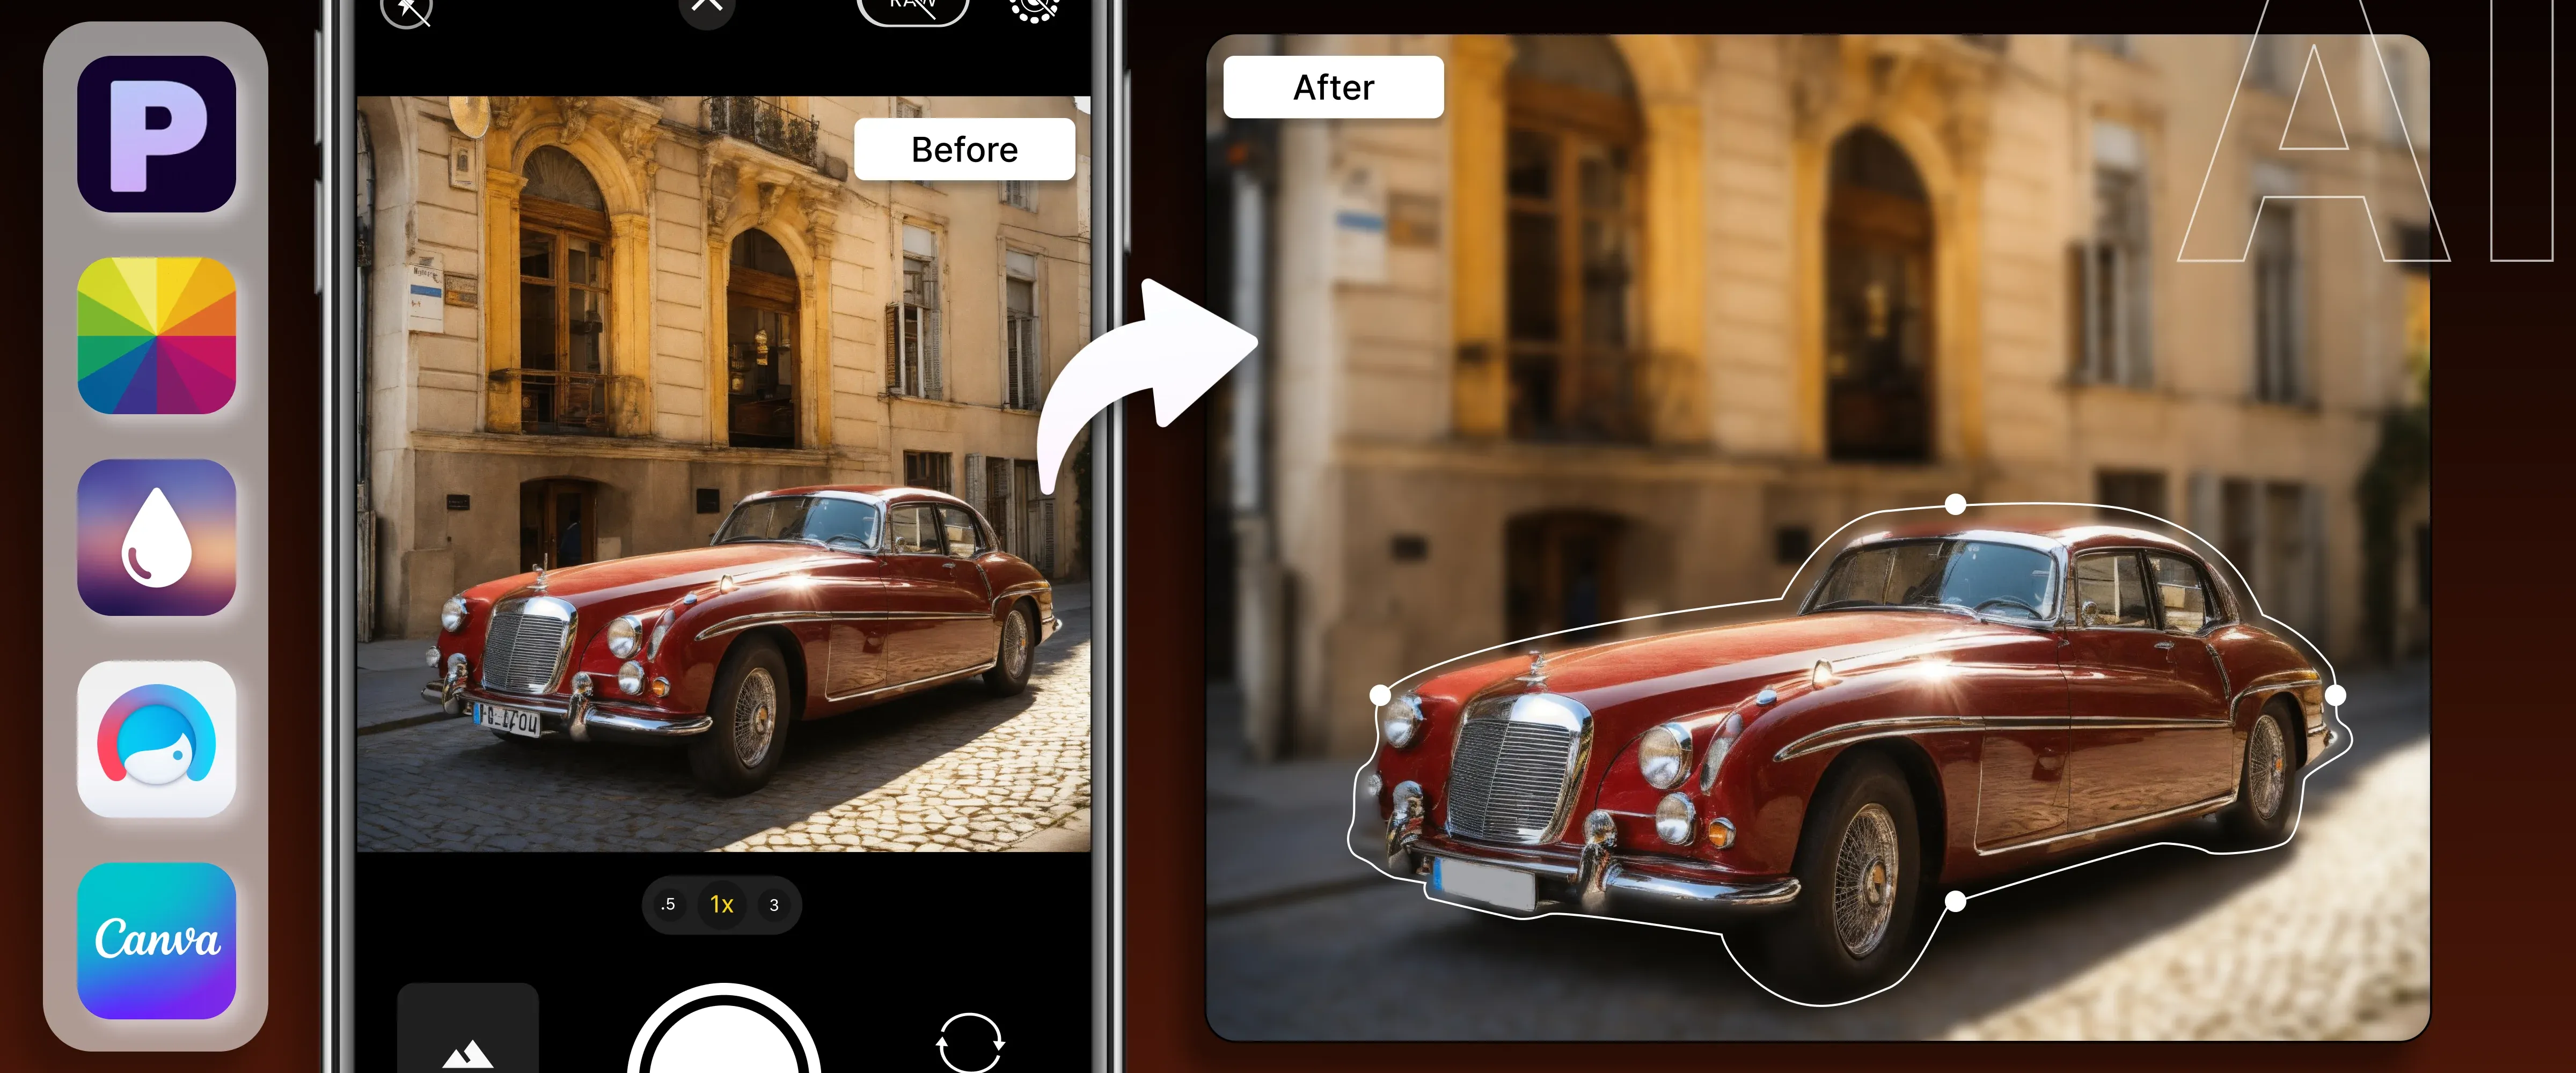 5 Best Background Blur Apps to Use: Elevate Your Photos cover